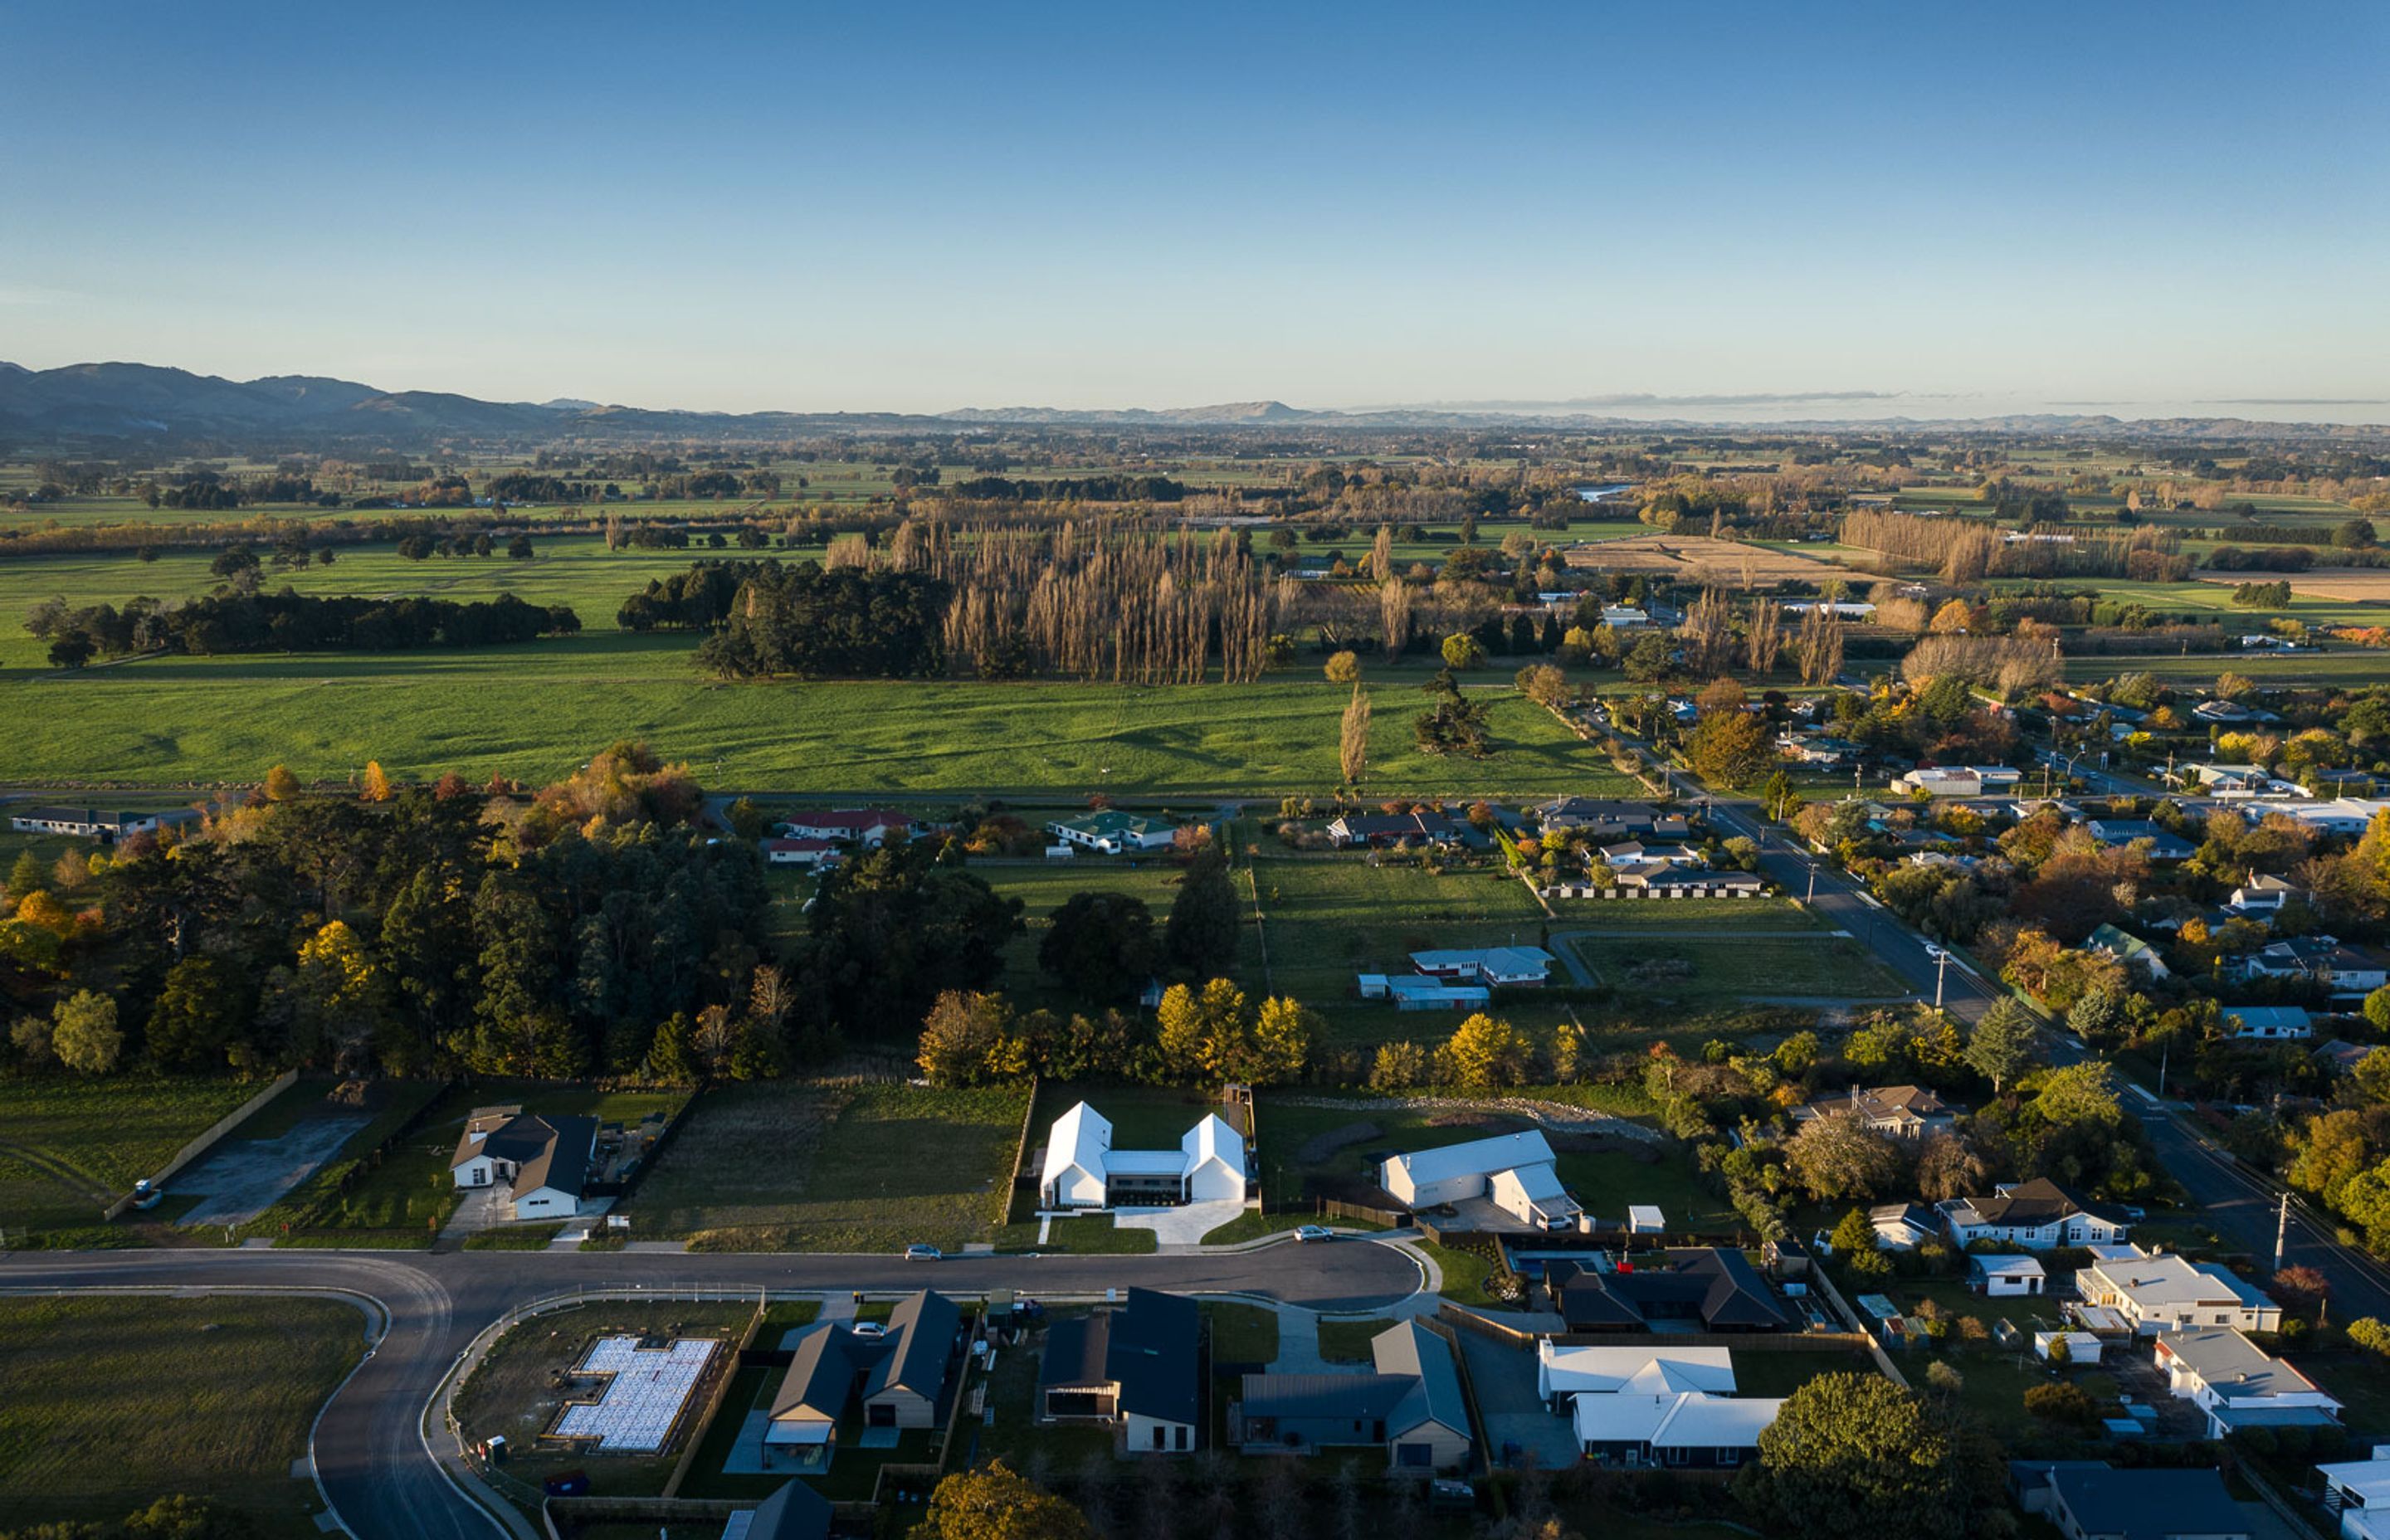 Located in the centre of the Wairarapa region, this new home is part of a new residential development on land that was once orchards.